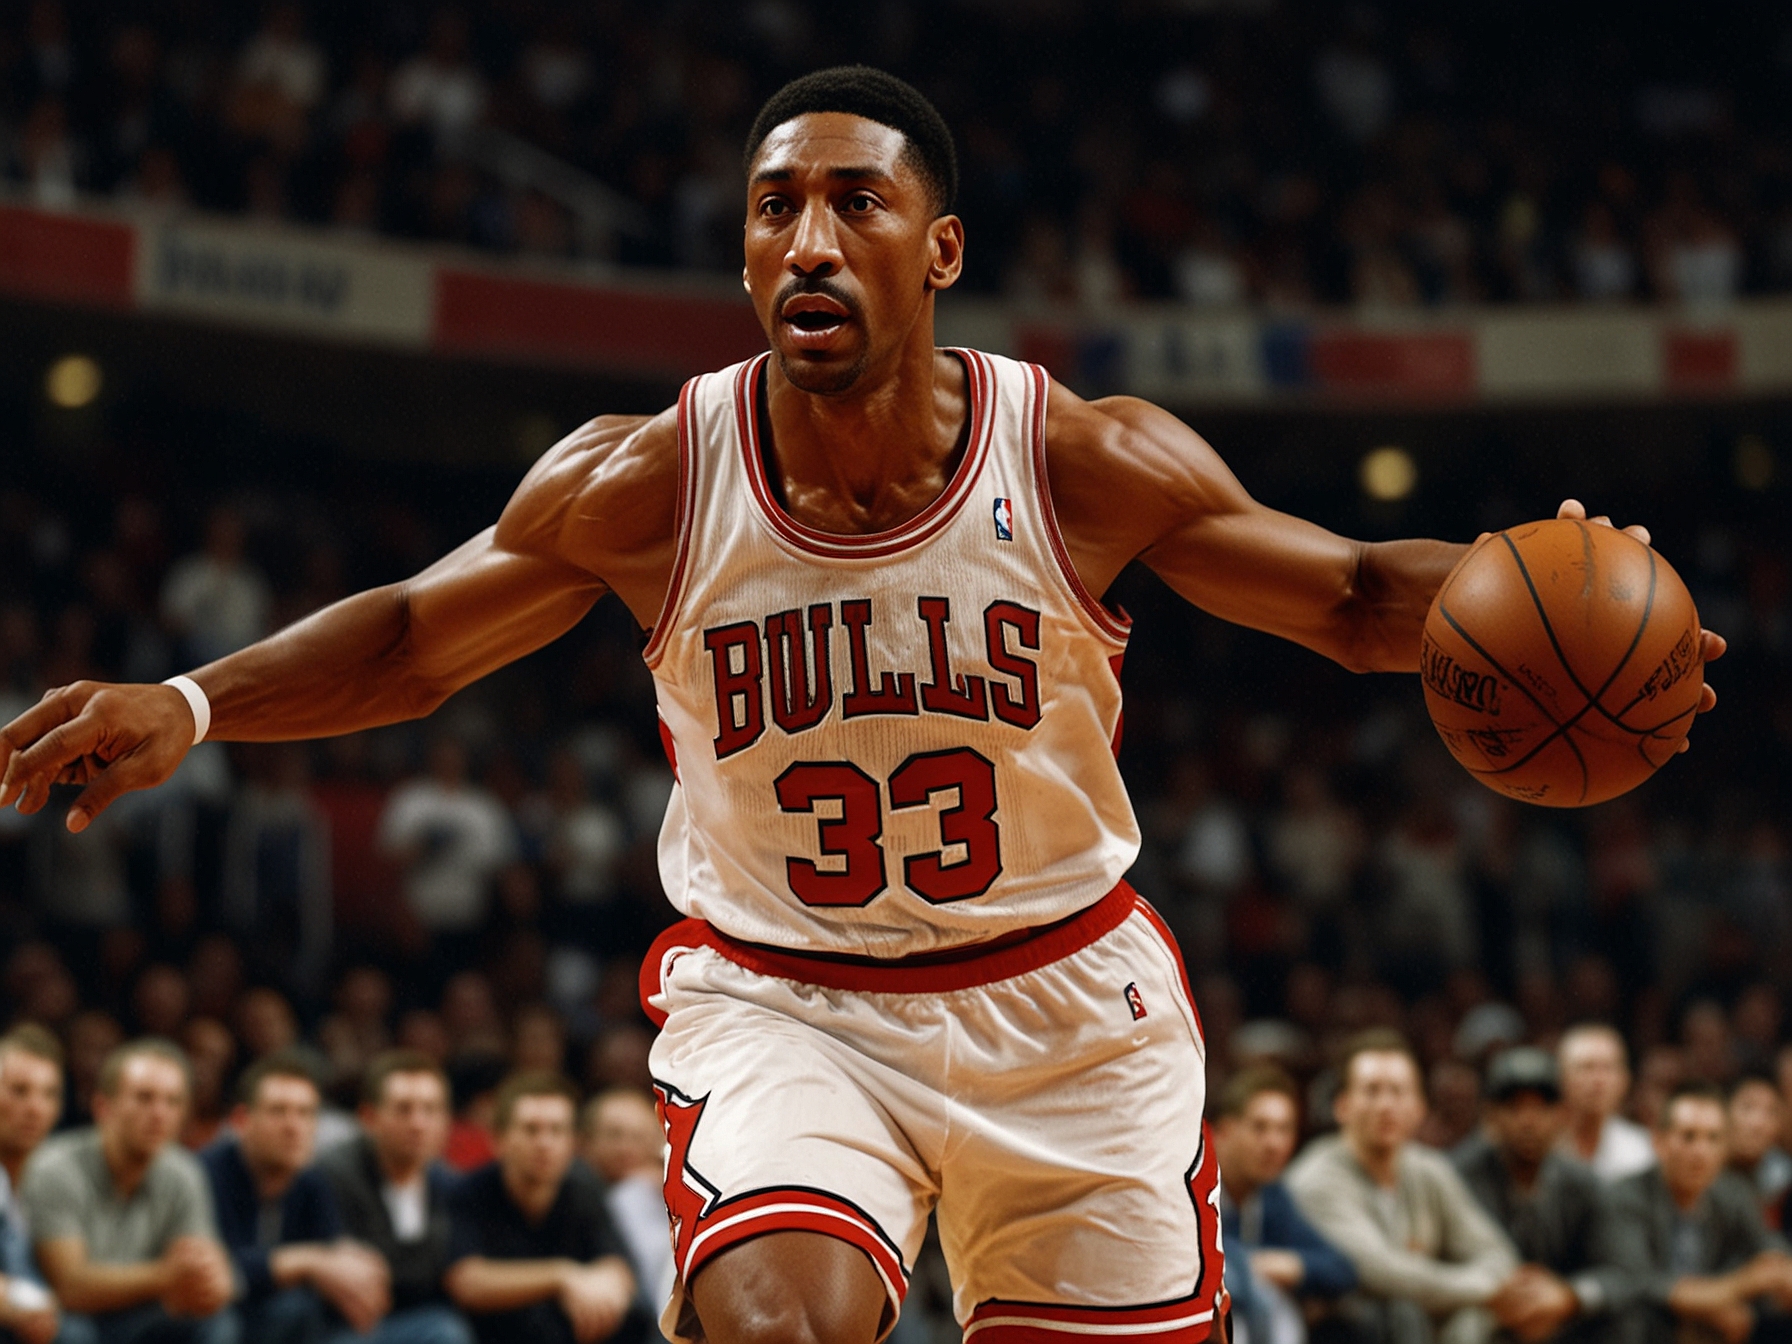 Image of Scottie Pippen showcasing his defensive prowess on the basketball court, highlighting his All-Defensive First Team selections and his role in leading the Chicago Bulls to six NBA championships.